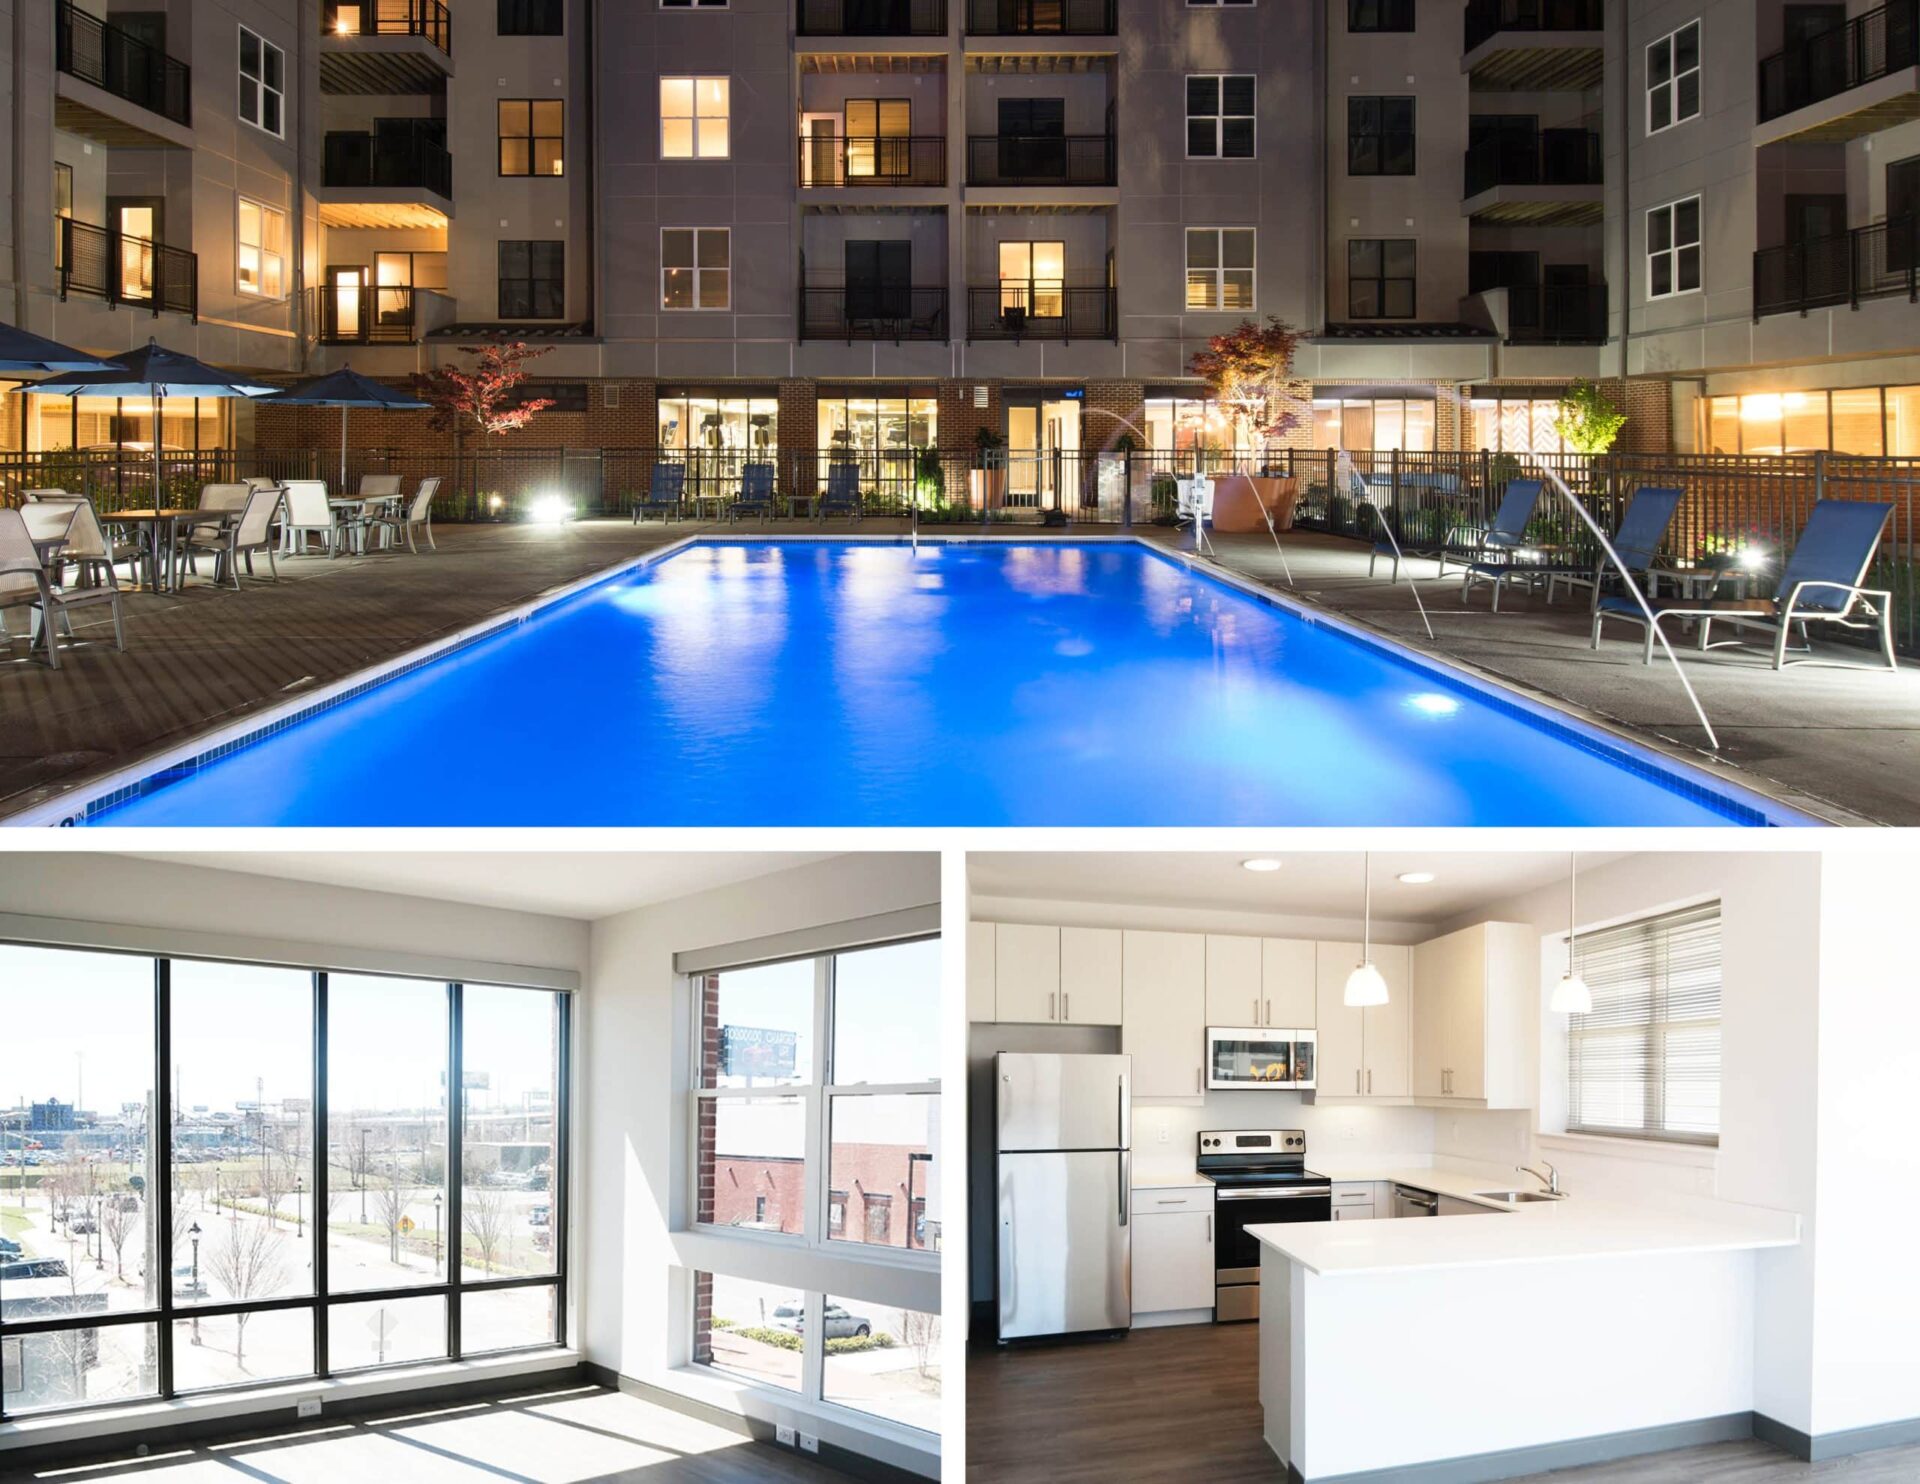 The Next Phase of Harlan Flat’s Brand New Riverfront Apartments are Now Open!